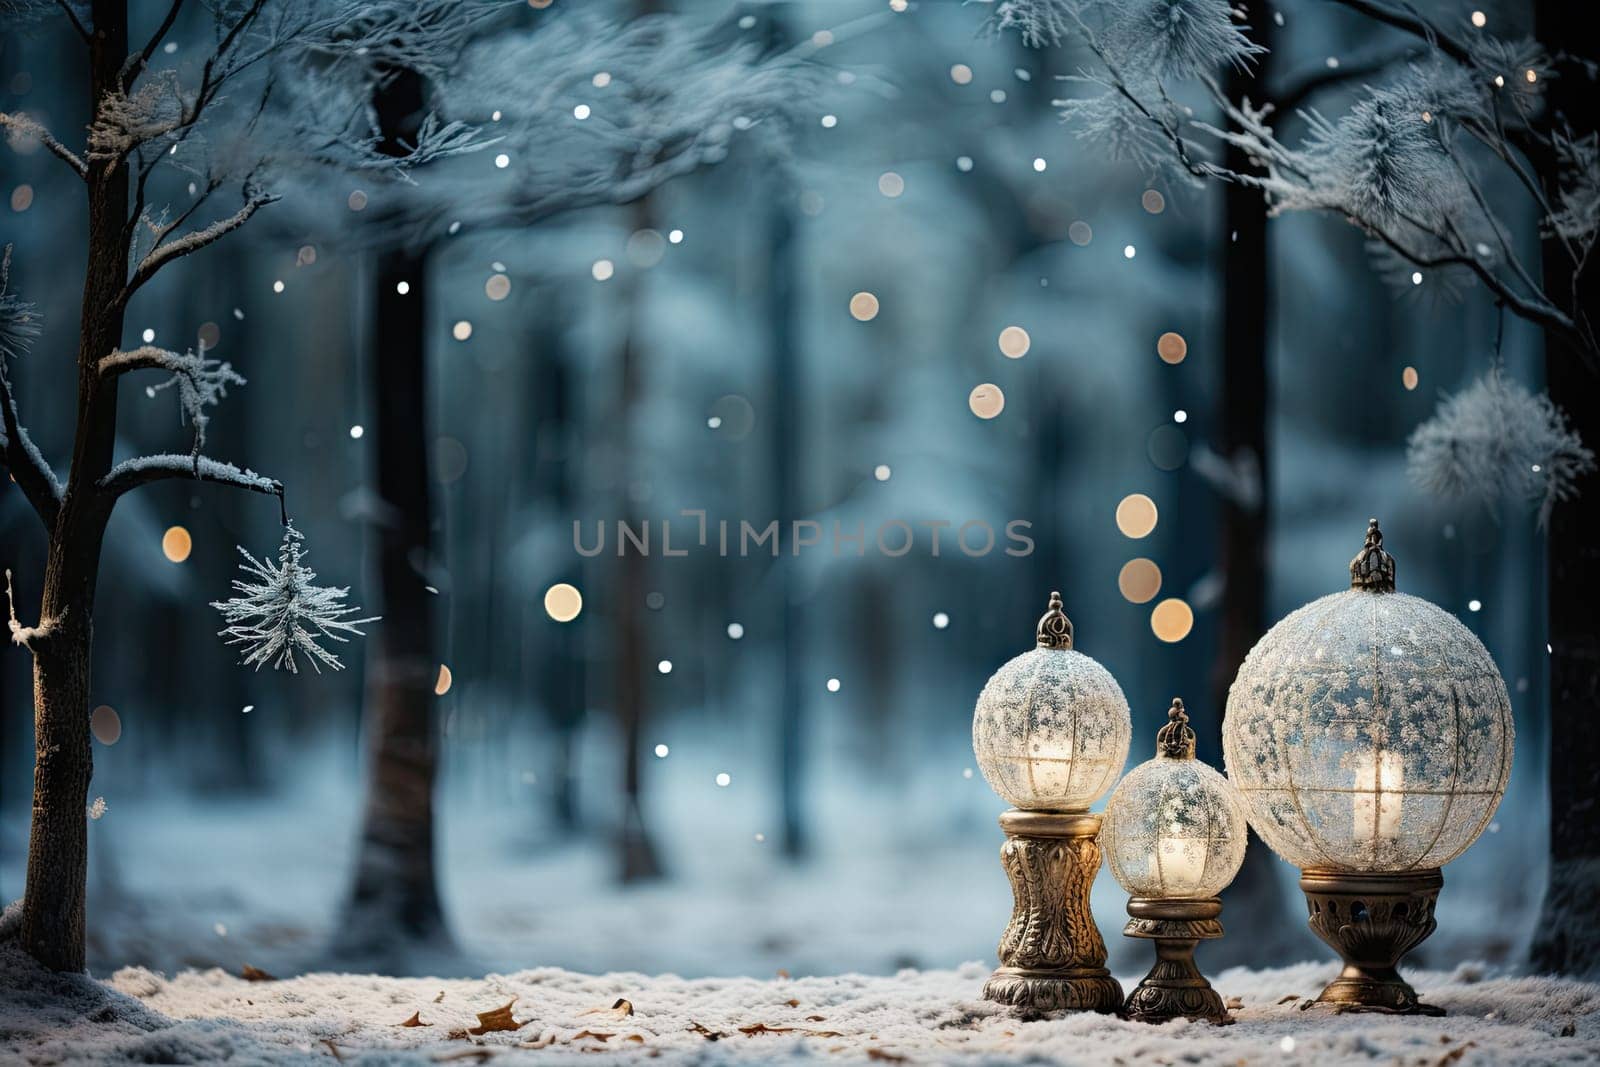 Icy Glow: Lamps Illuminating a Wintry Landscape